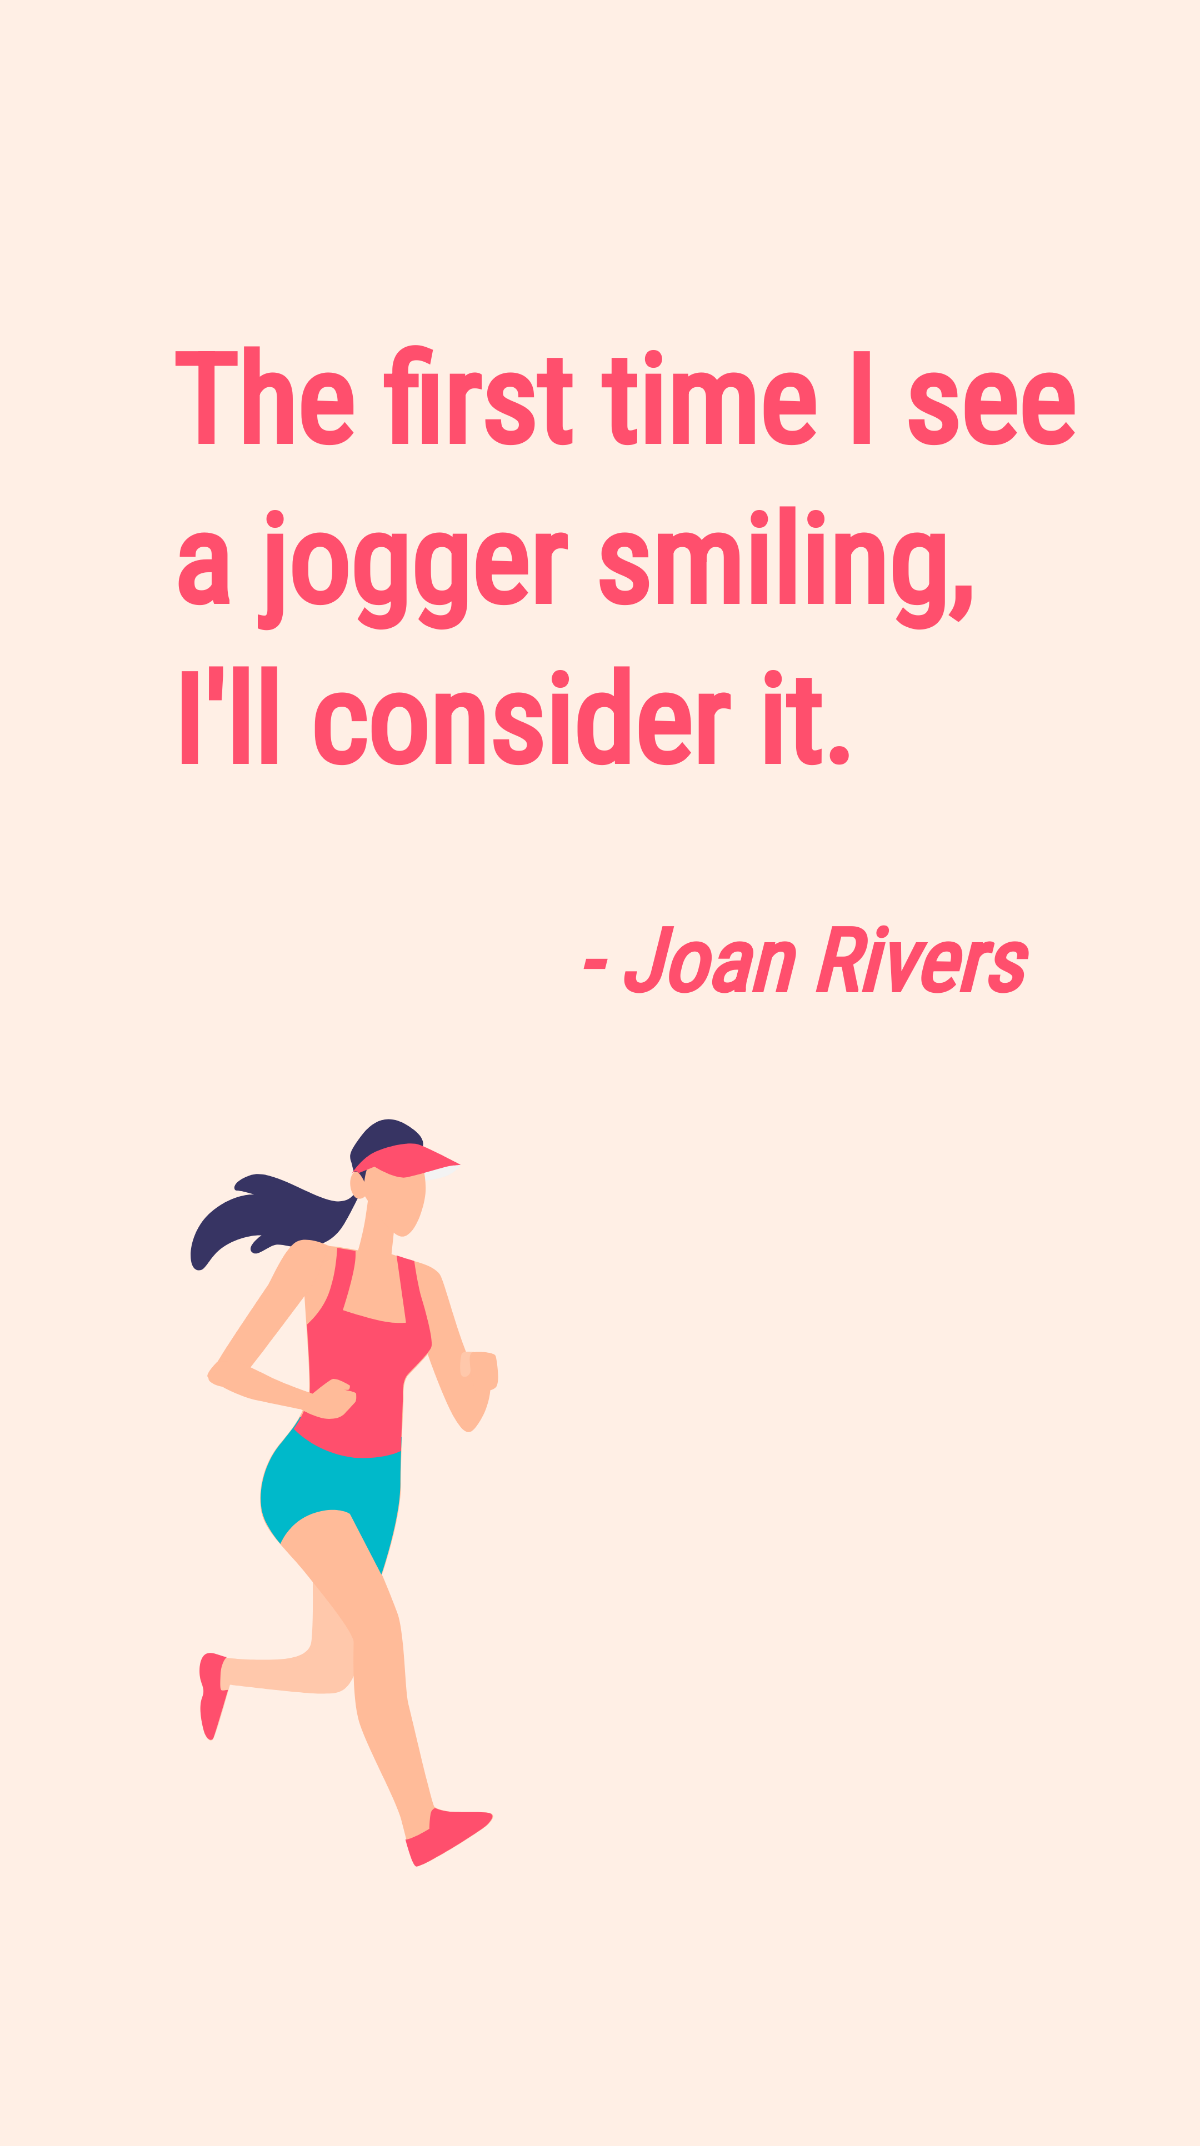 Joan Rivers - The first time I see a jogger smiling, I'll consider it. Template